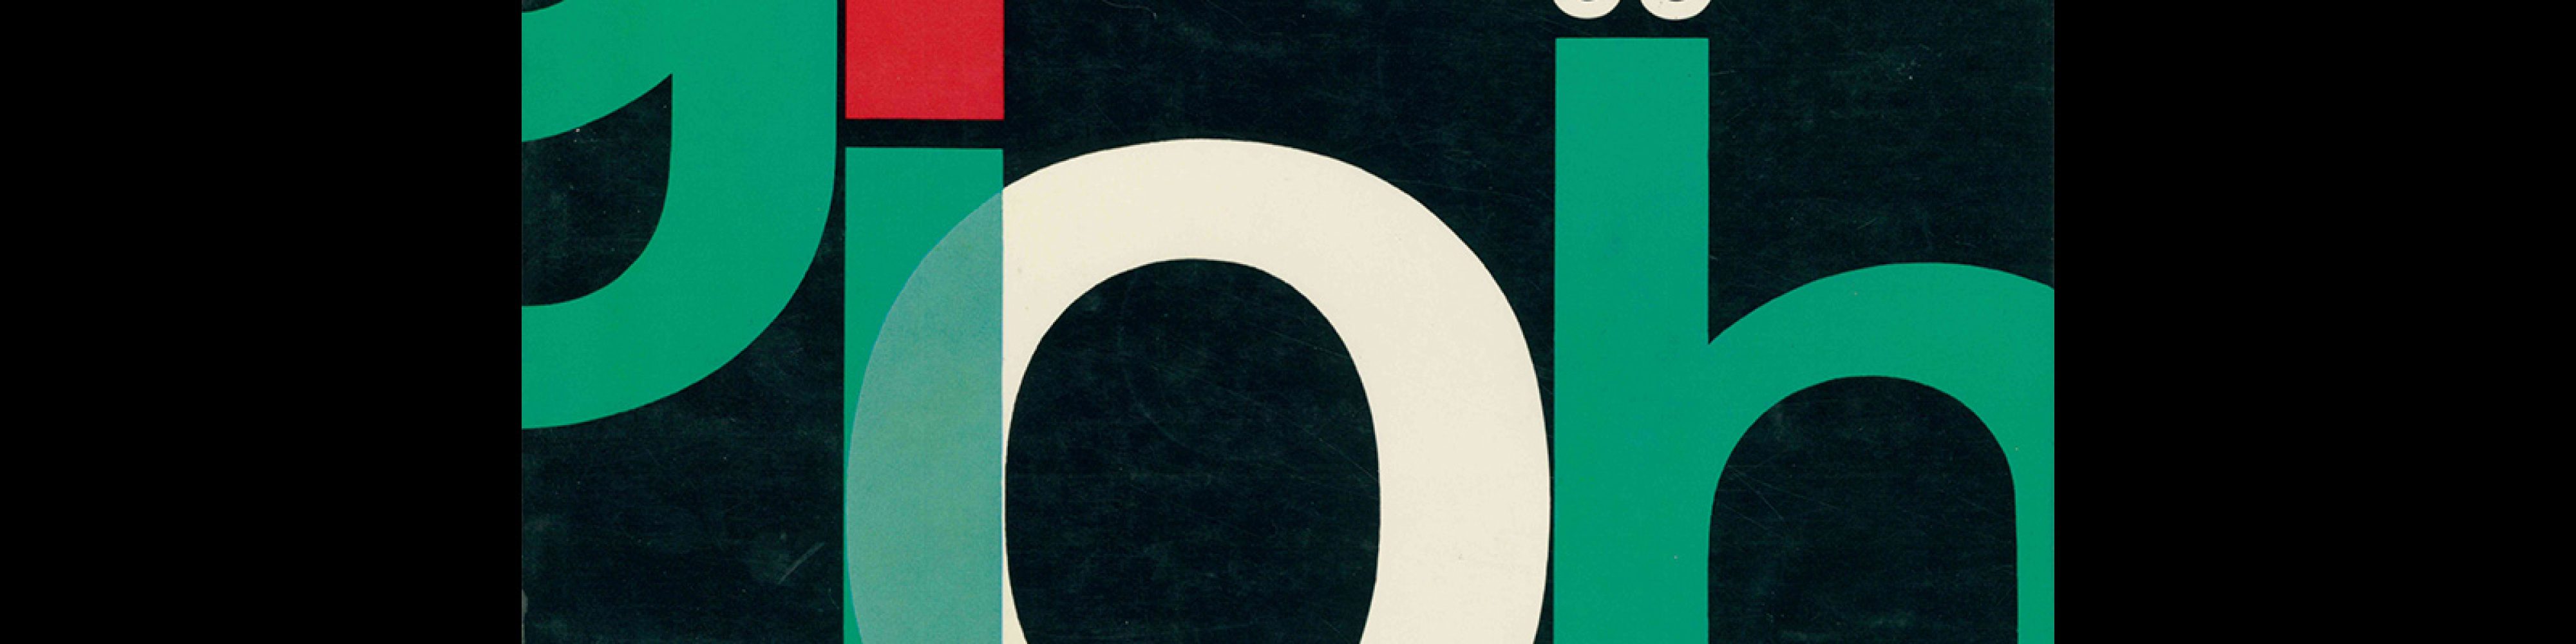 Graphis 99, 1962. Cover design by Reid Miles